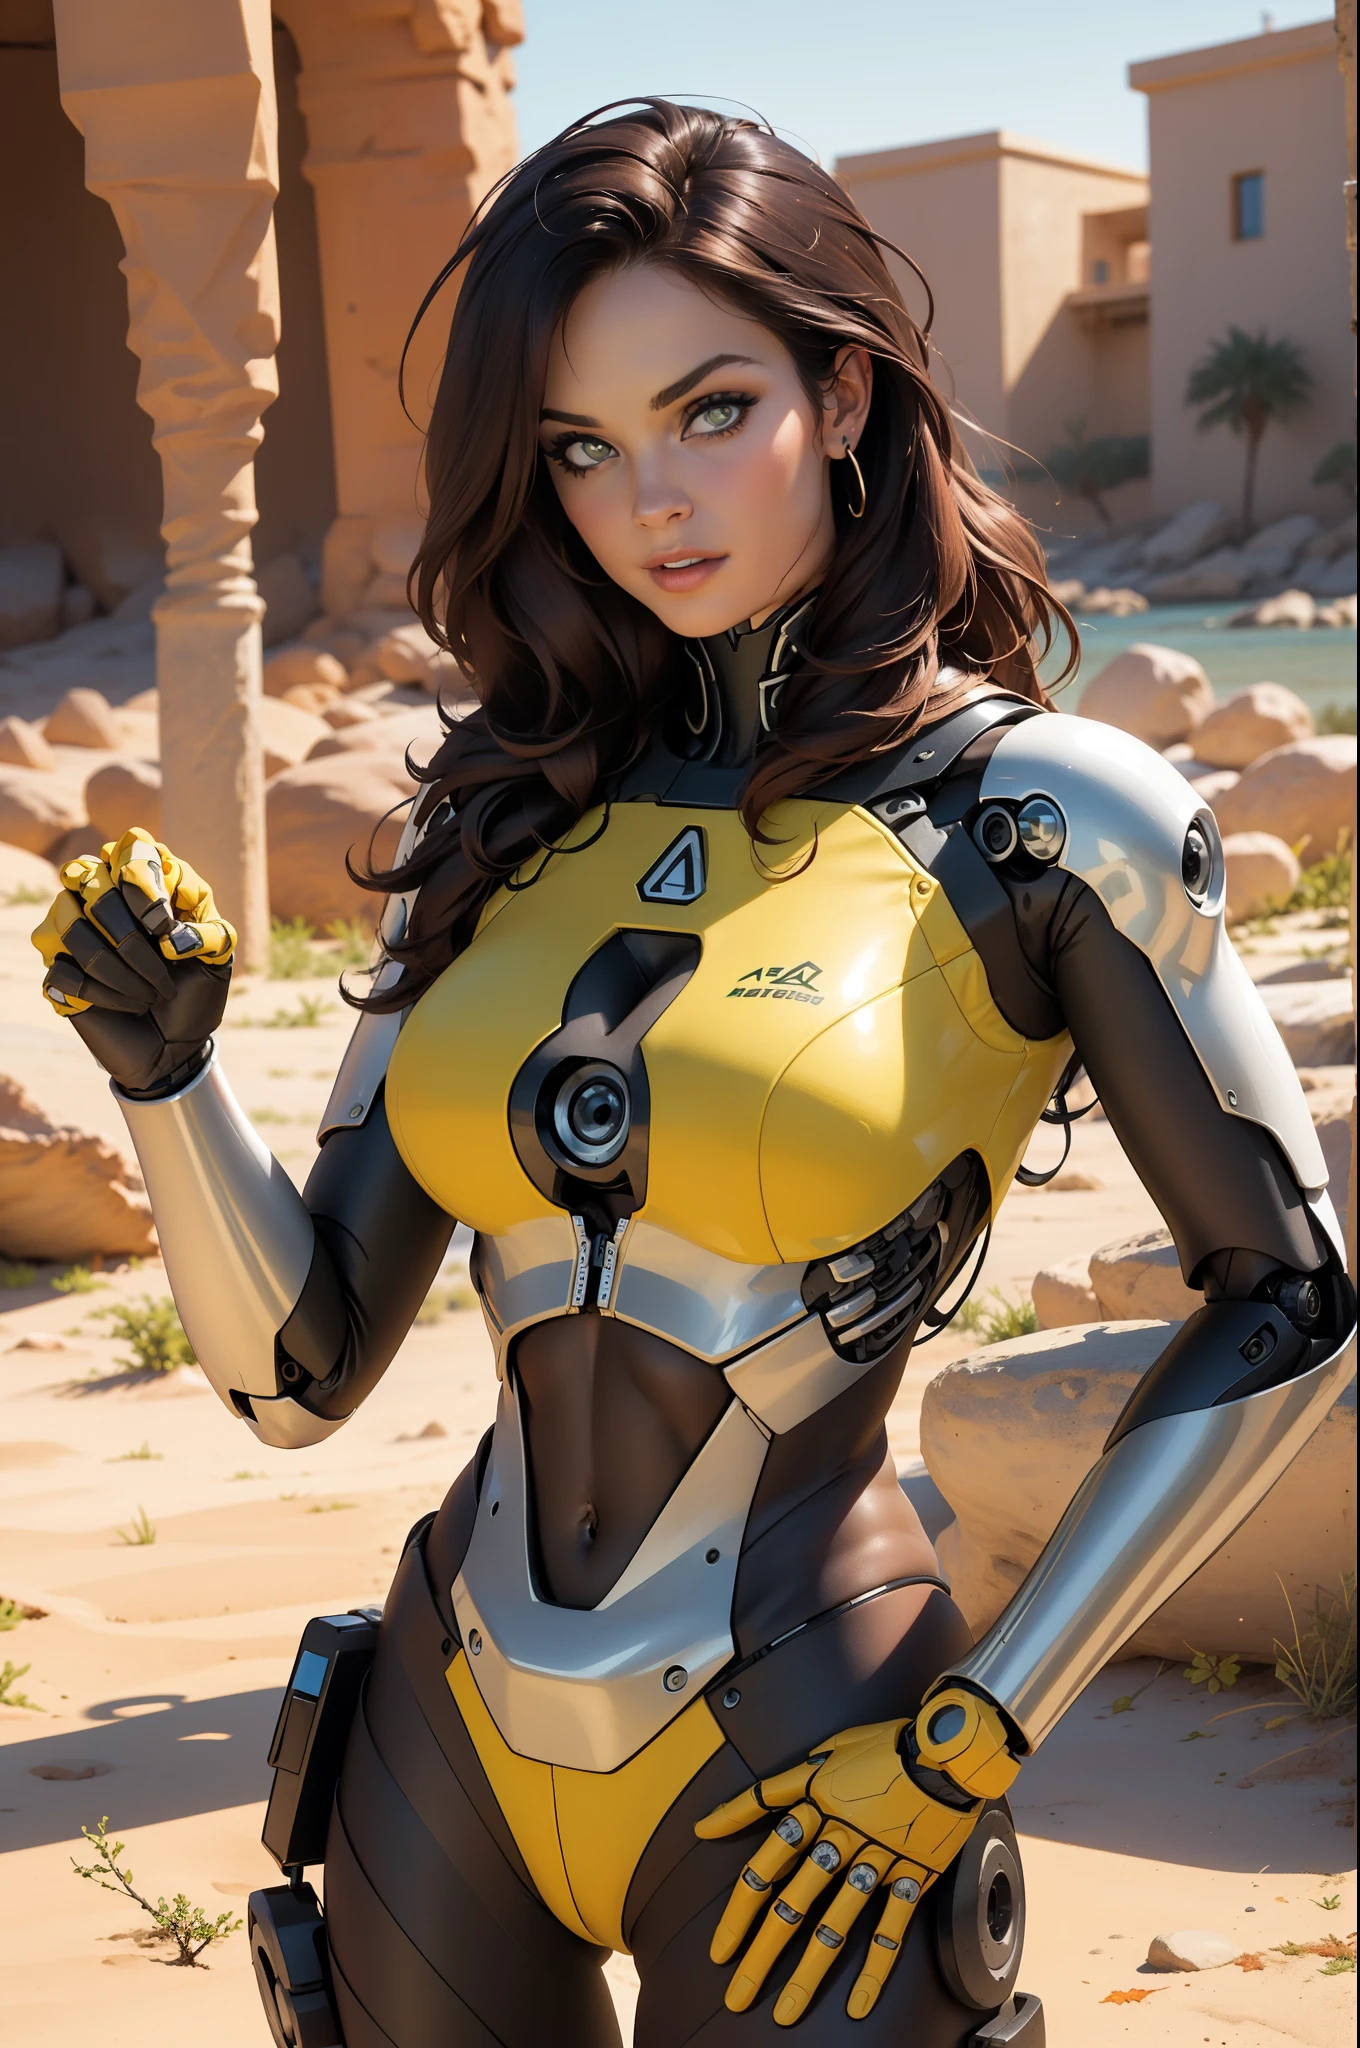 high qualiy, 4K, work of art, comely, Alison Tyler como uma cyborg Kizi, cowboy shot, dull eyes, 正面, gazing at viewer, long blonde hair, Kizi, breasts small, fit thighs, robotic arms, robotic body, cyborg body, yellow & white uniform, orange accent, intricate-detail, articulation, detailed lines, robotic detail, holding your fist up, holding hand as fist, colorful robotic parts, robotic parts with color, perfect toes, on a desert planet, sunny background, colorful desert, a river or lake in the background, fine thighs, skinny thighs,